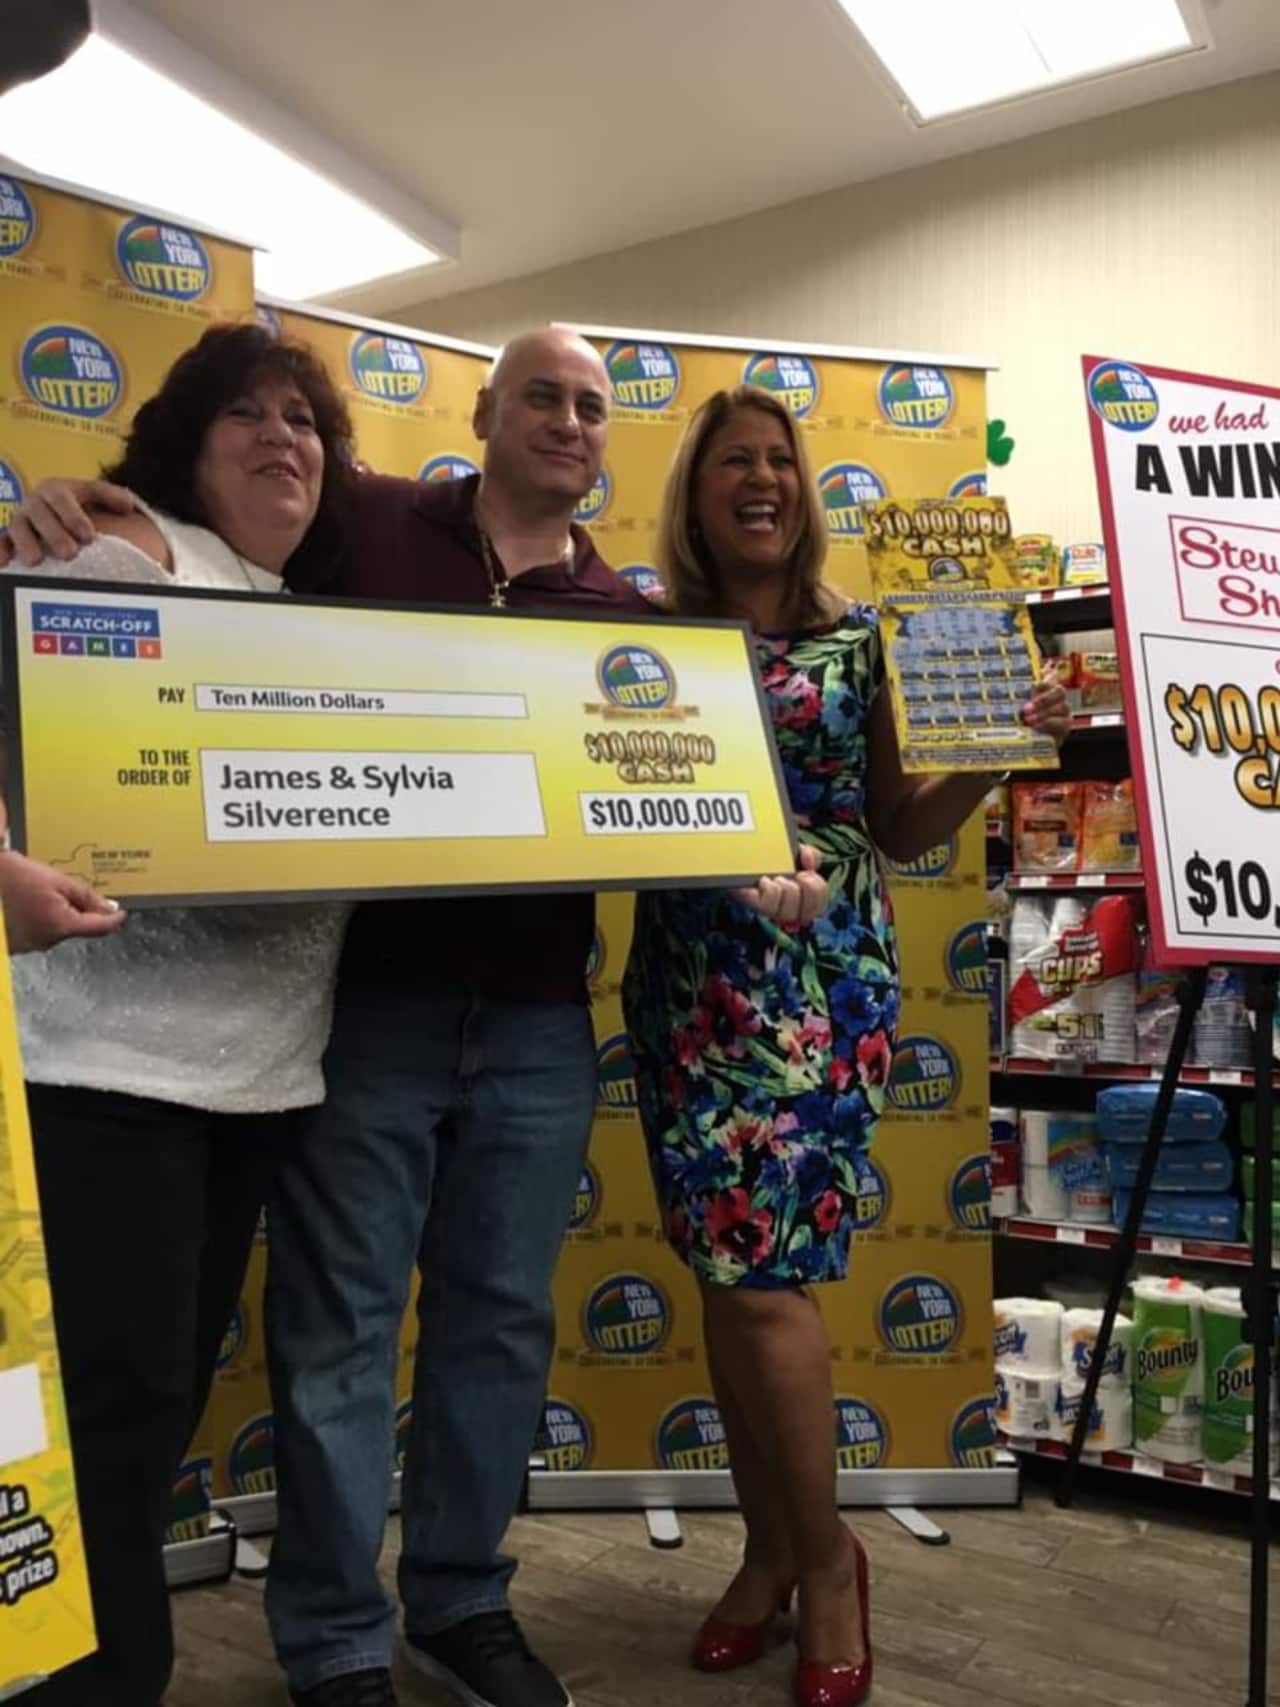 Poughkeepsie couple James and Sylvia Silverence accept an oversized check for $10 million from Lottery spokeswoman Yolanda Vega at a Stewart's Shops store Thursday.